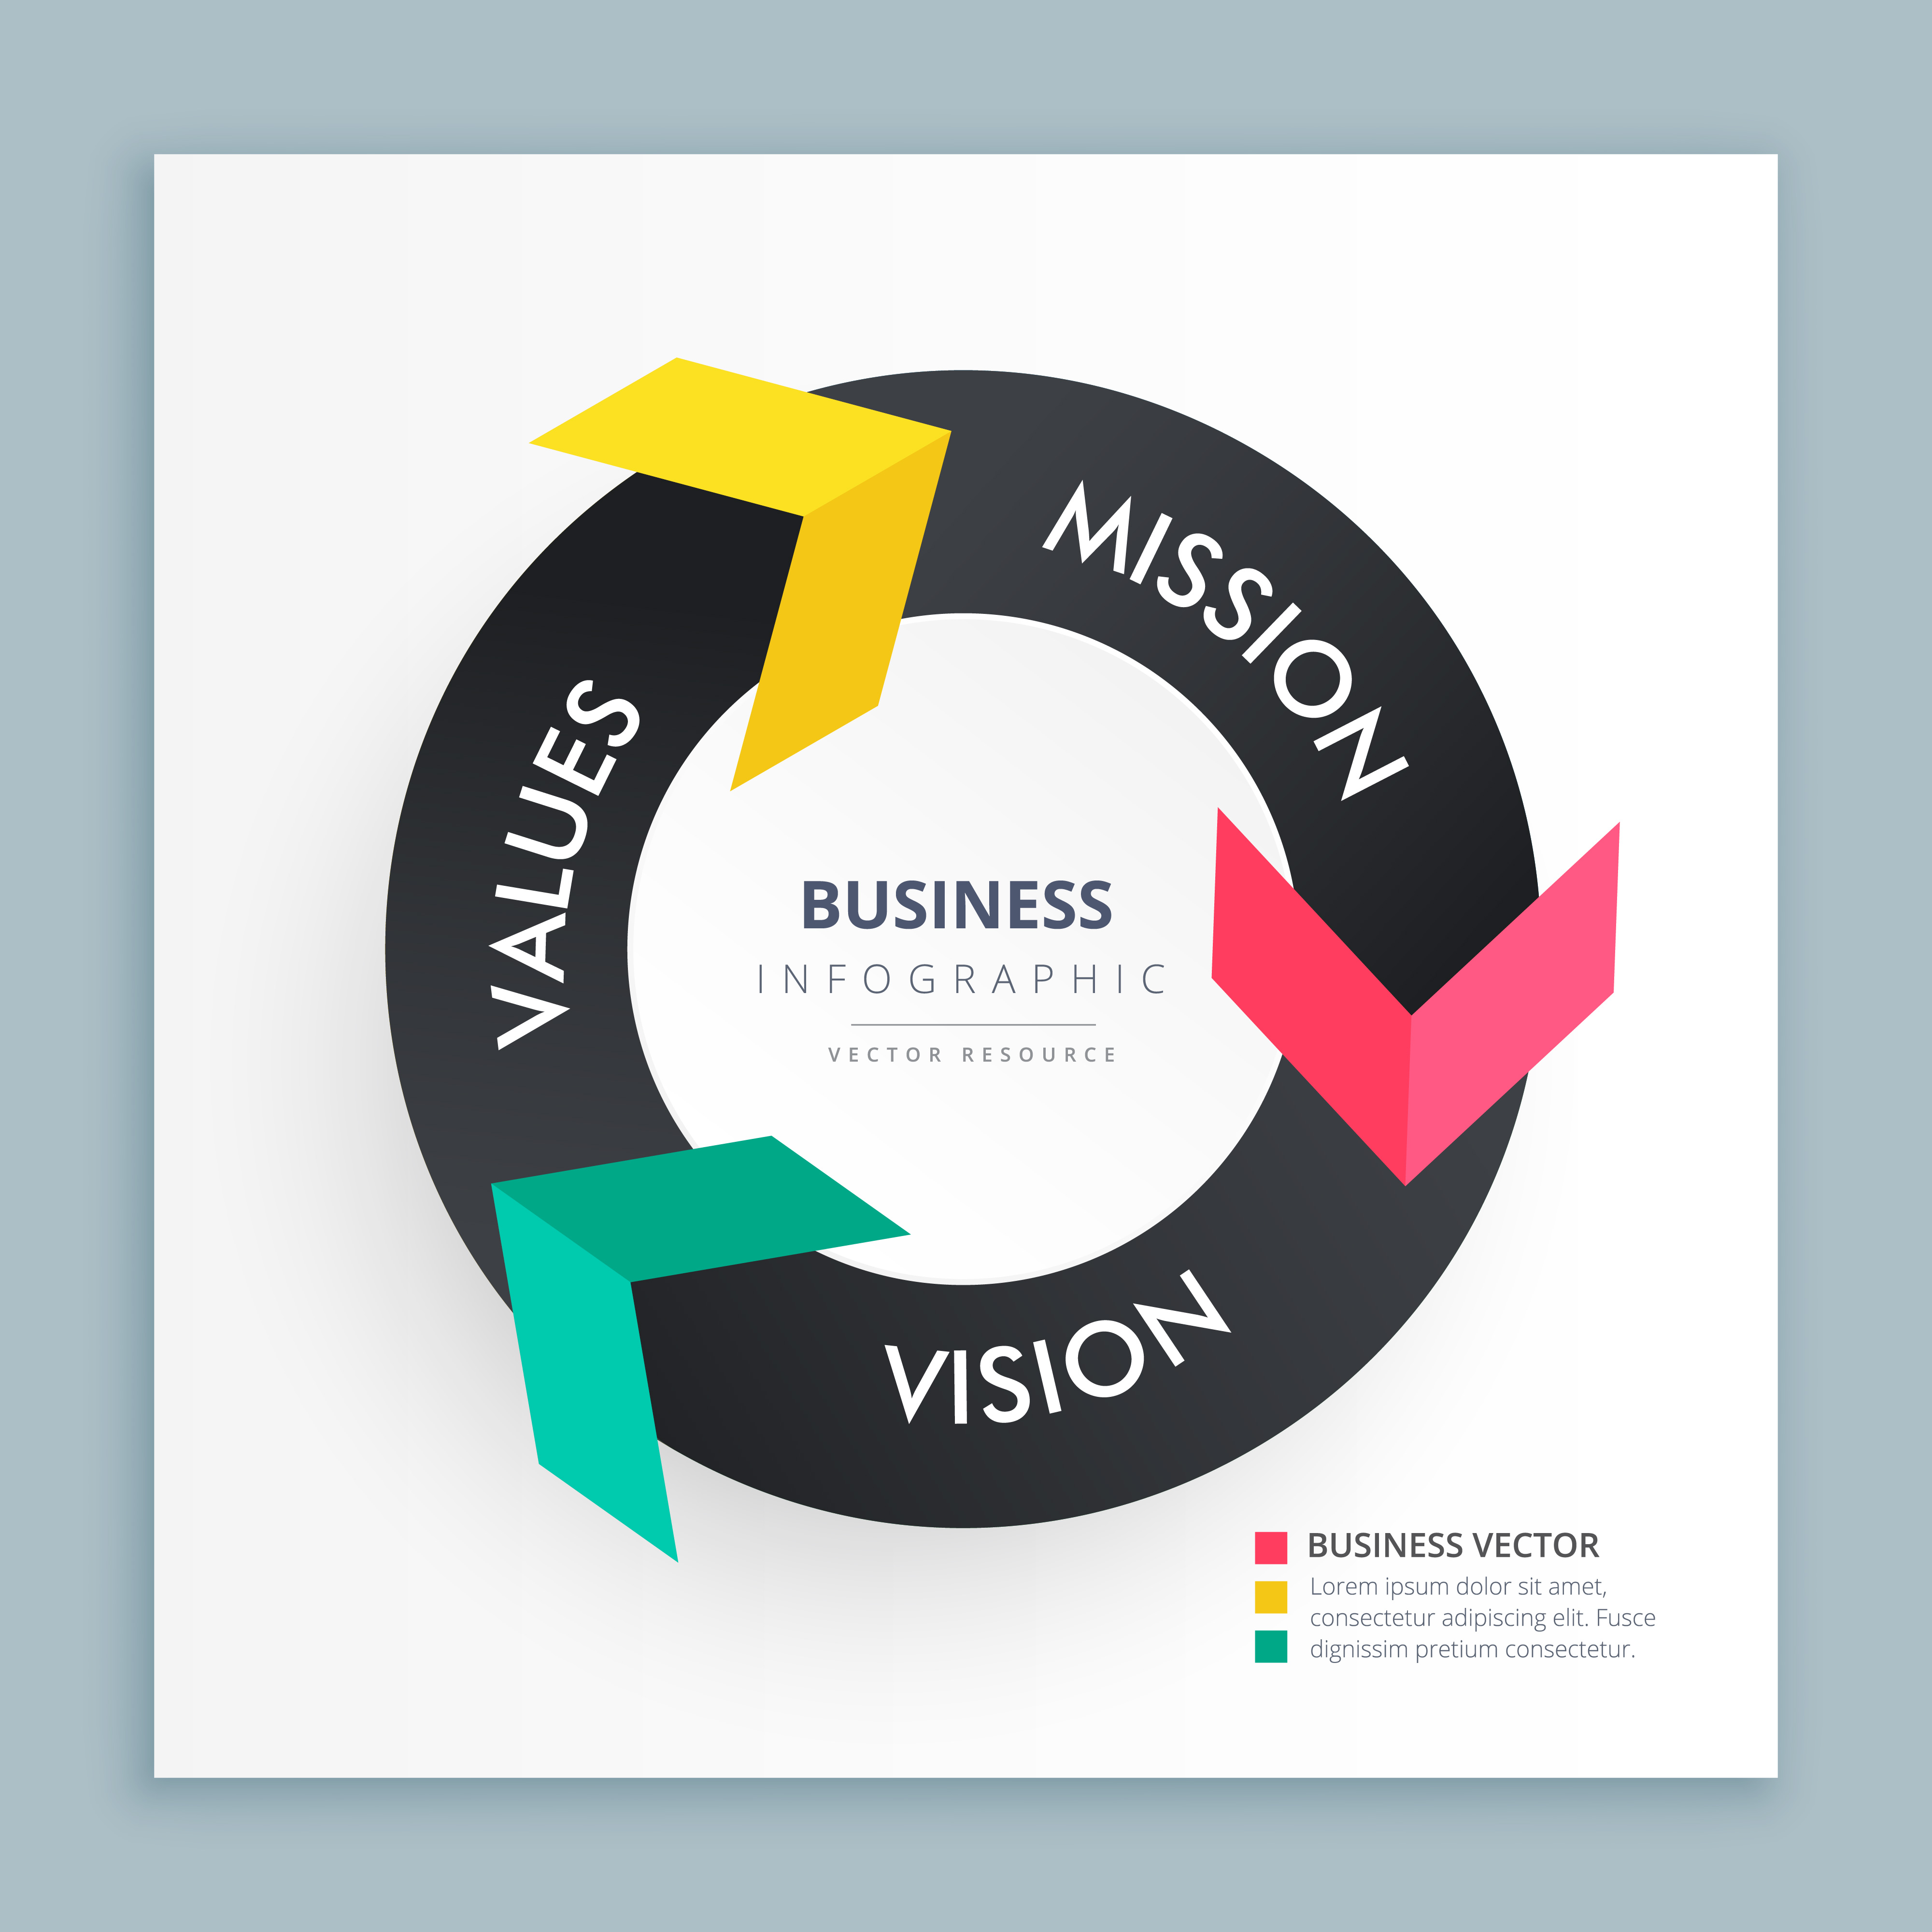 Vision/Mission Infographic